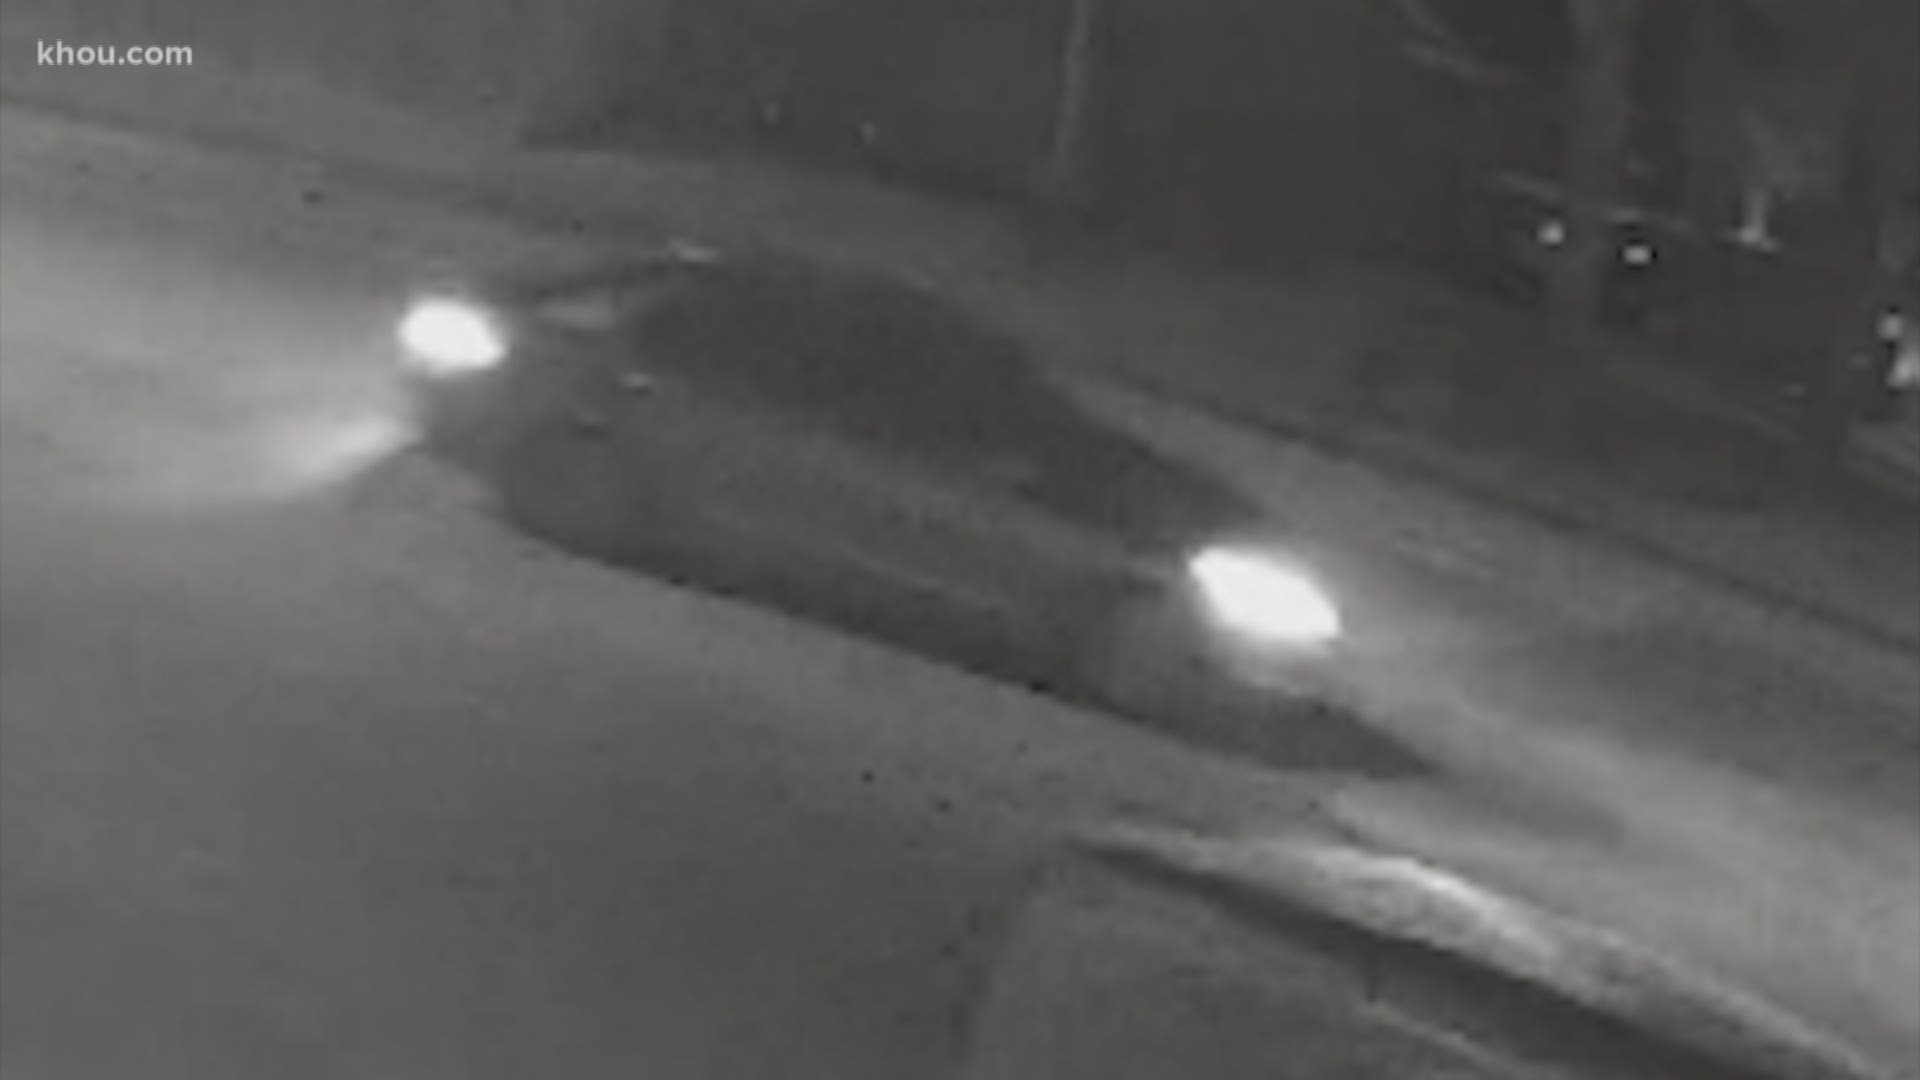 Deputies released a surveillance photo of a vehicle of interest in connection with the fatal shooting of a Katy-area father during a home invasion.